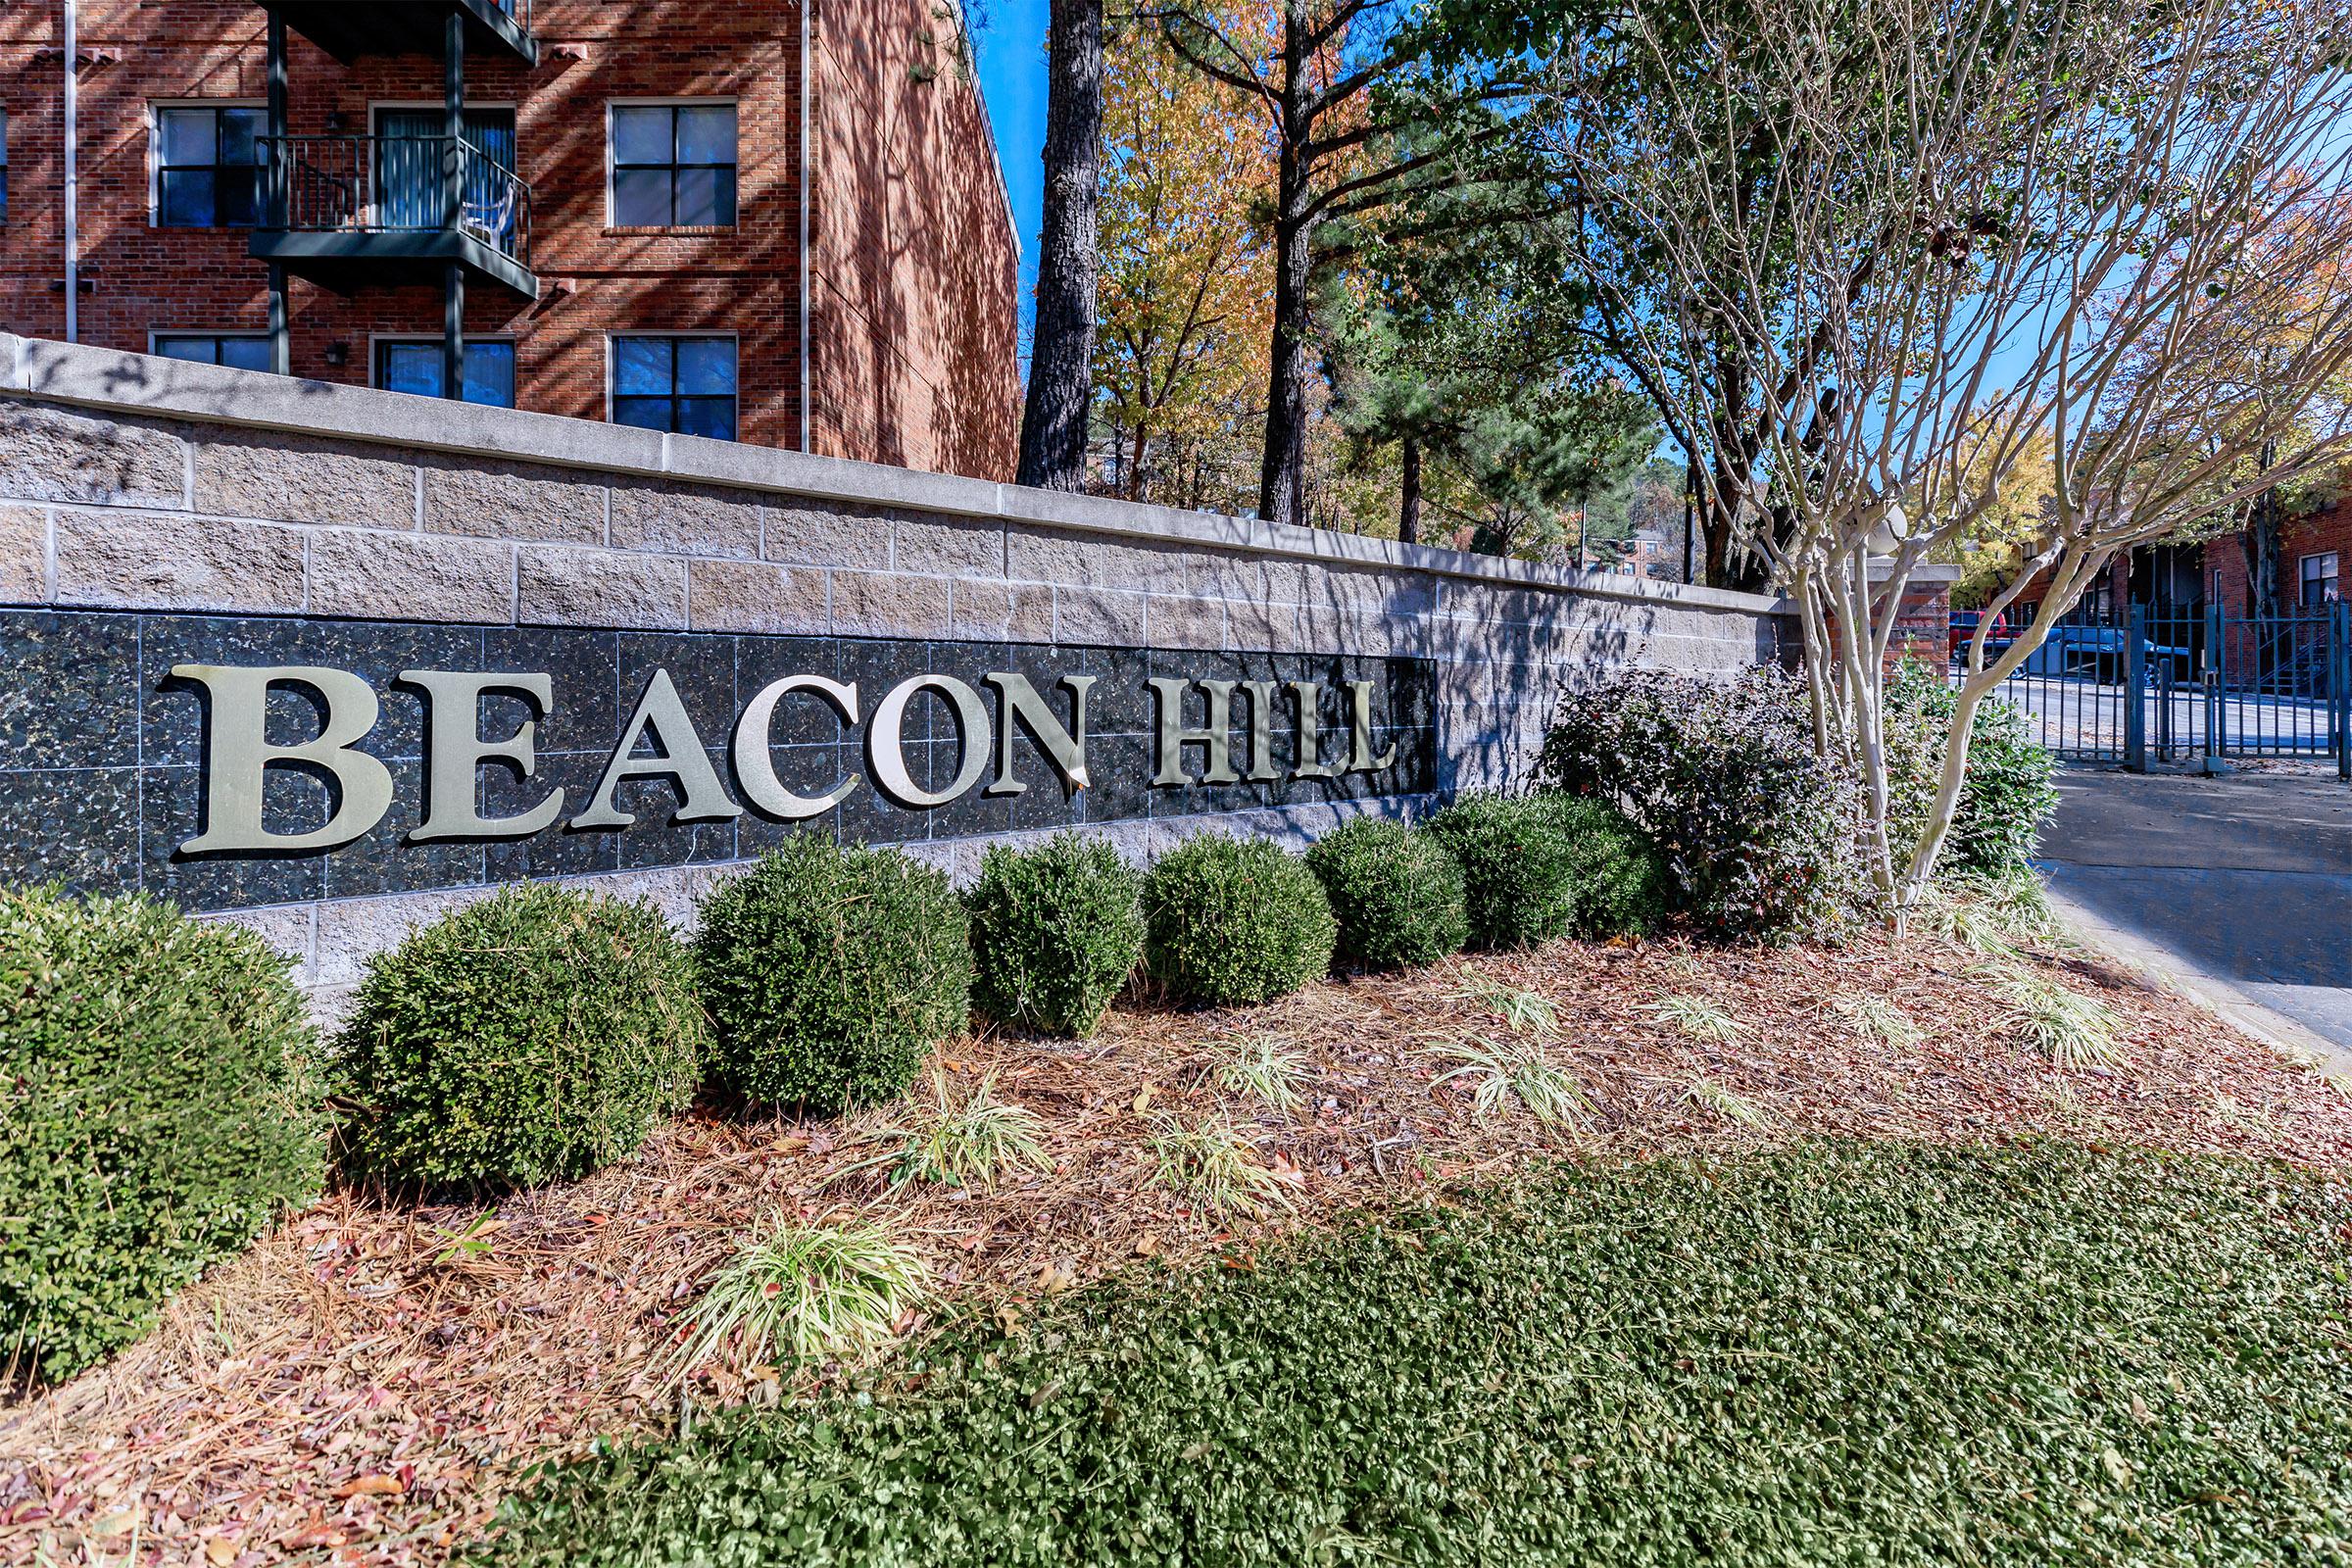 Picture of Beacon Hill